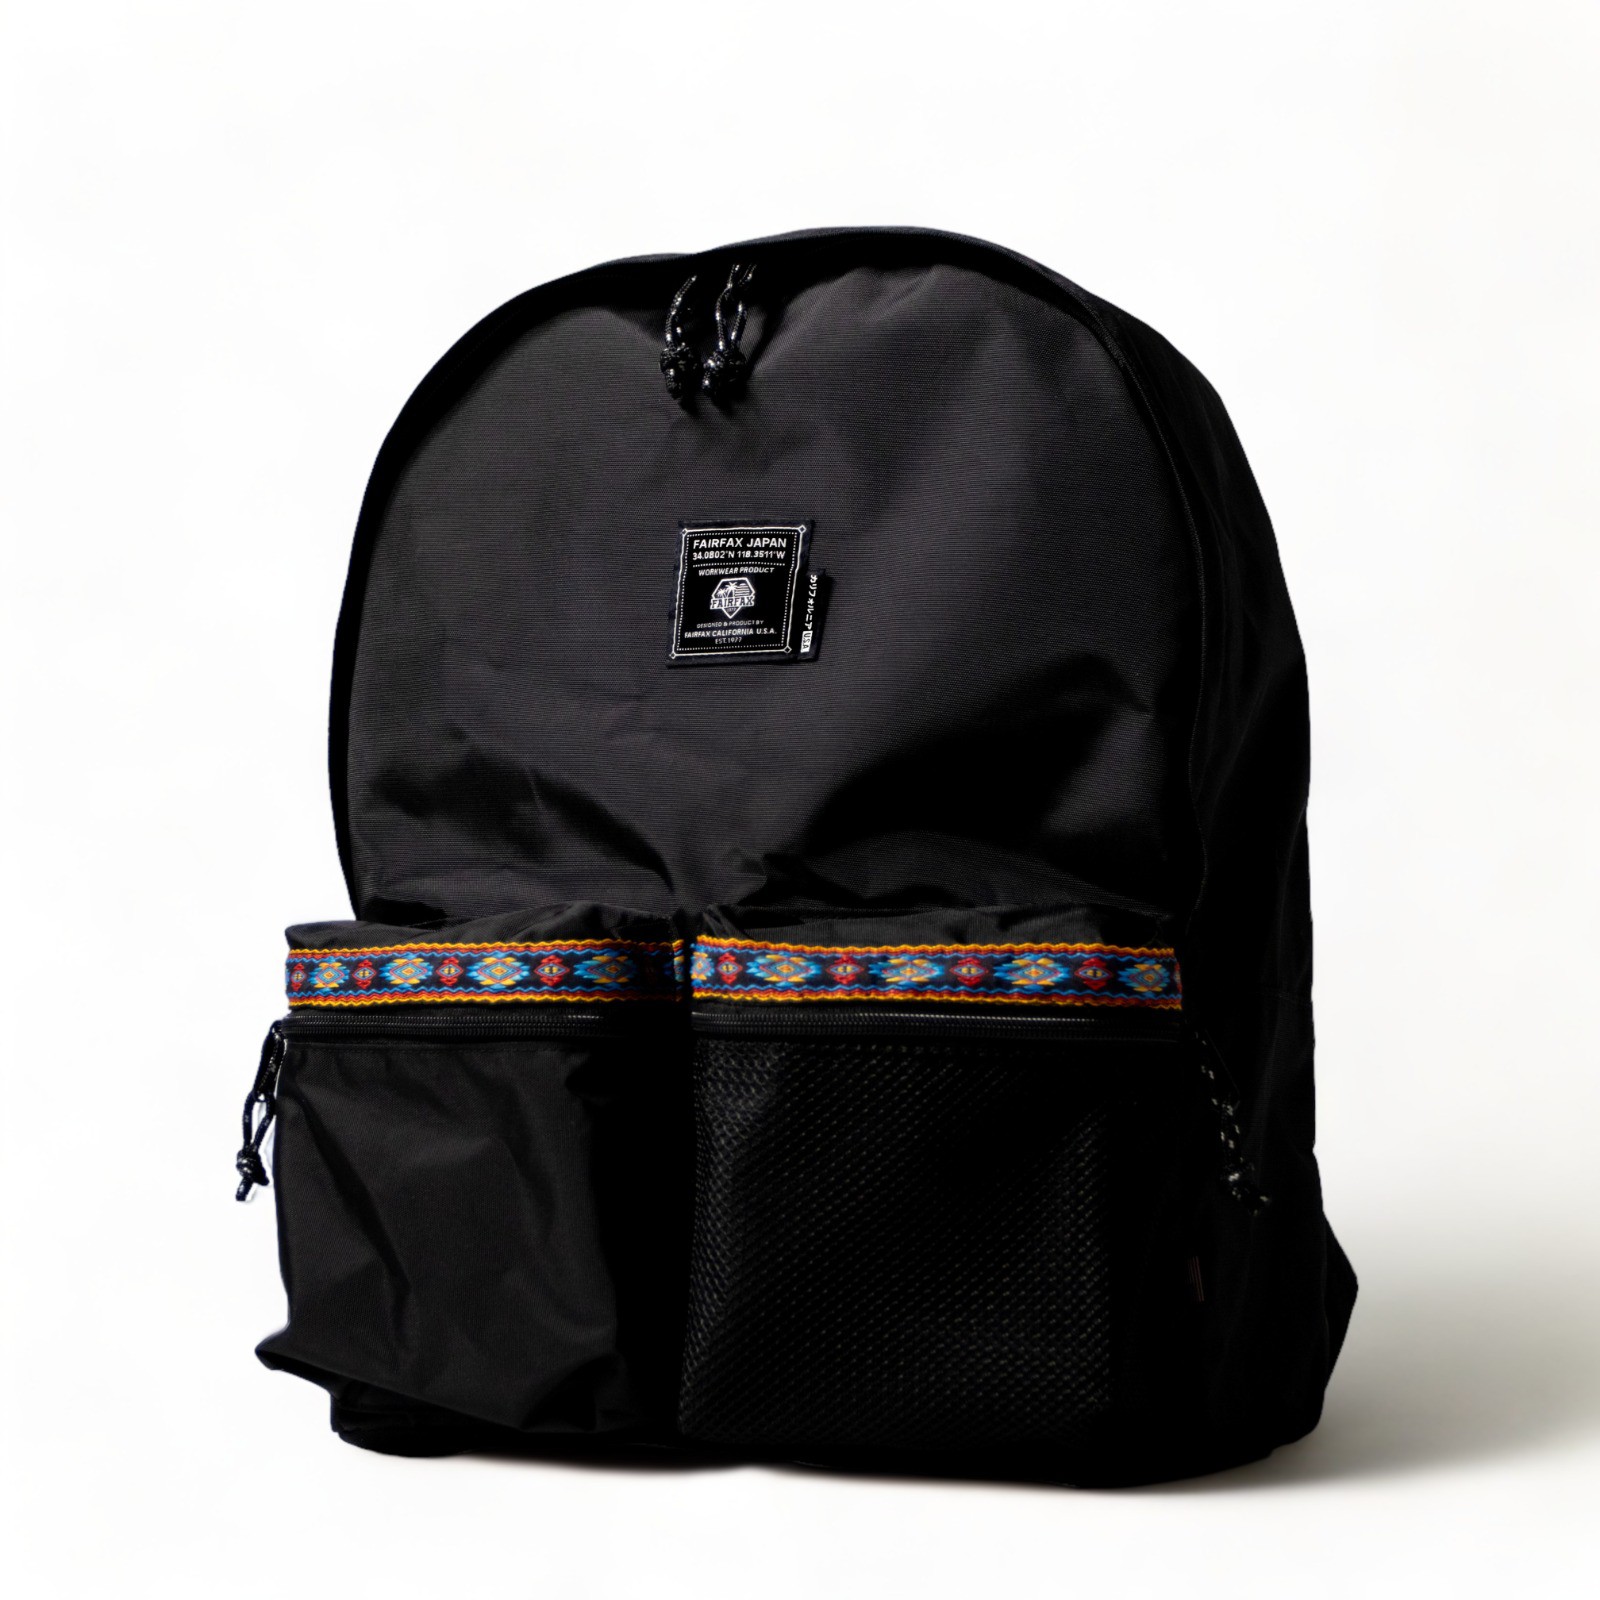 Fairfax Over Size Back Pack 日用 背囊 背包 Black